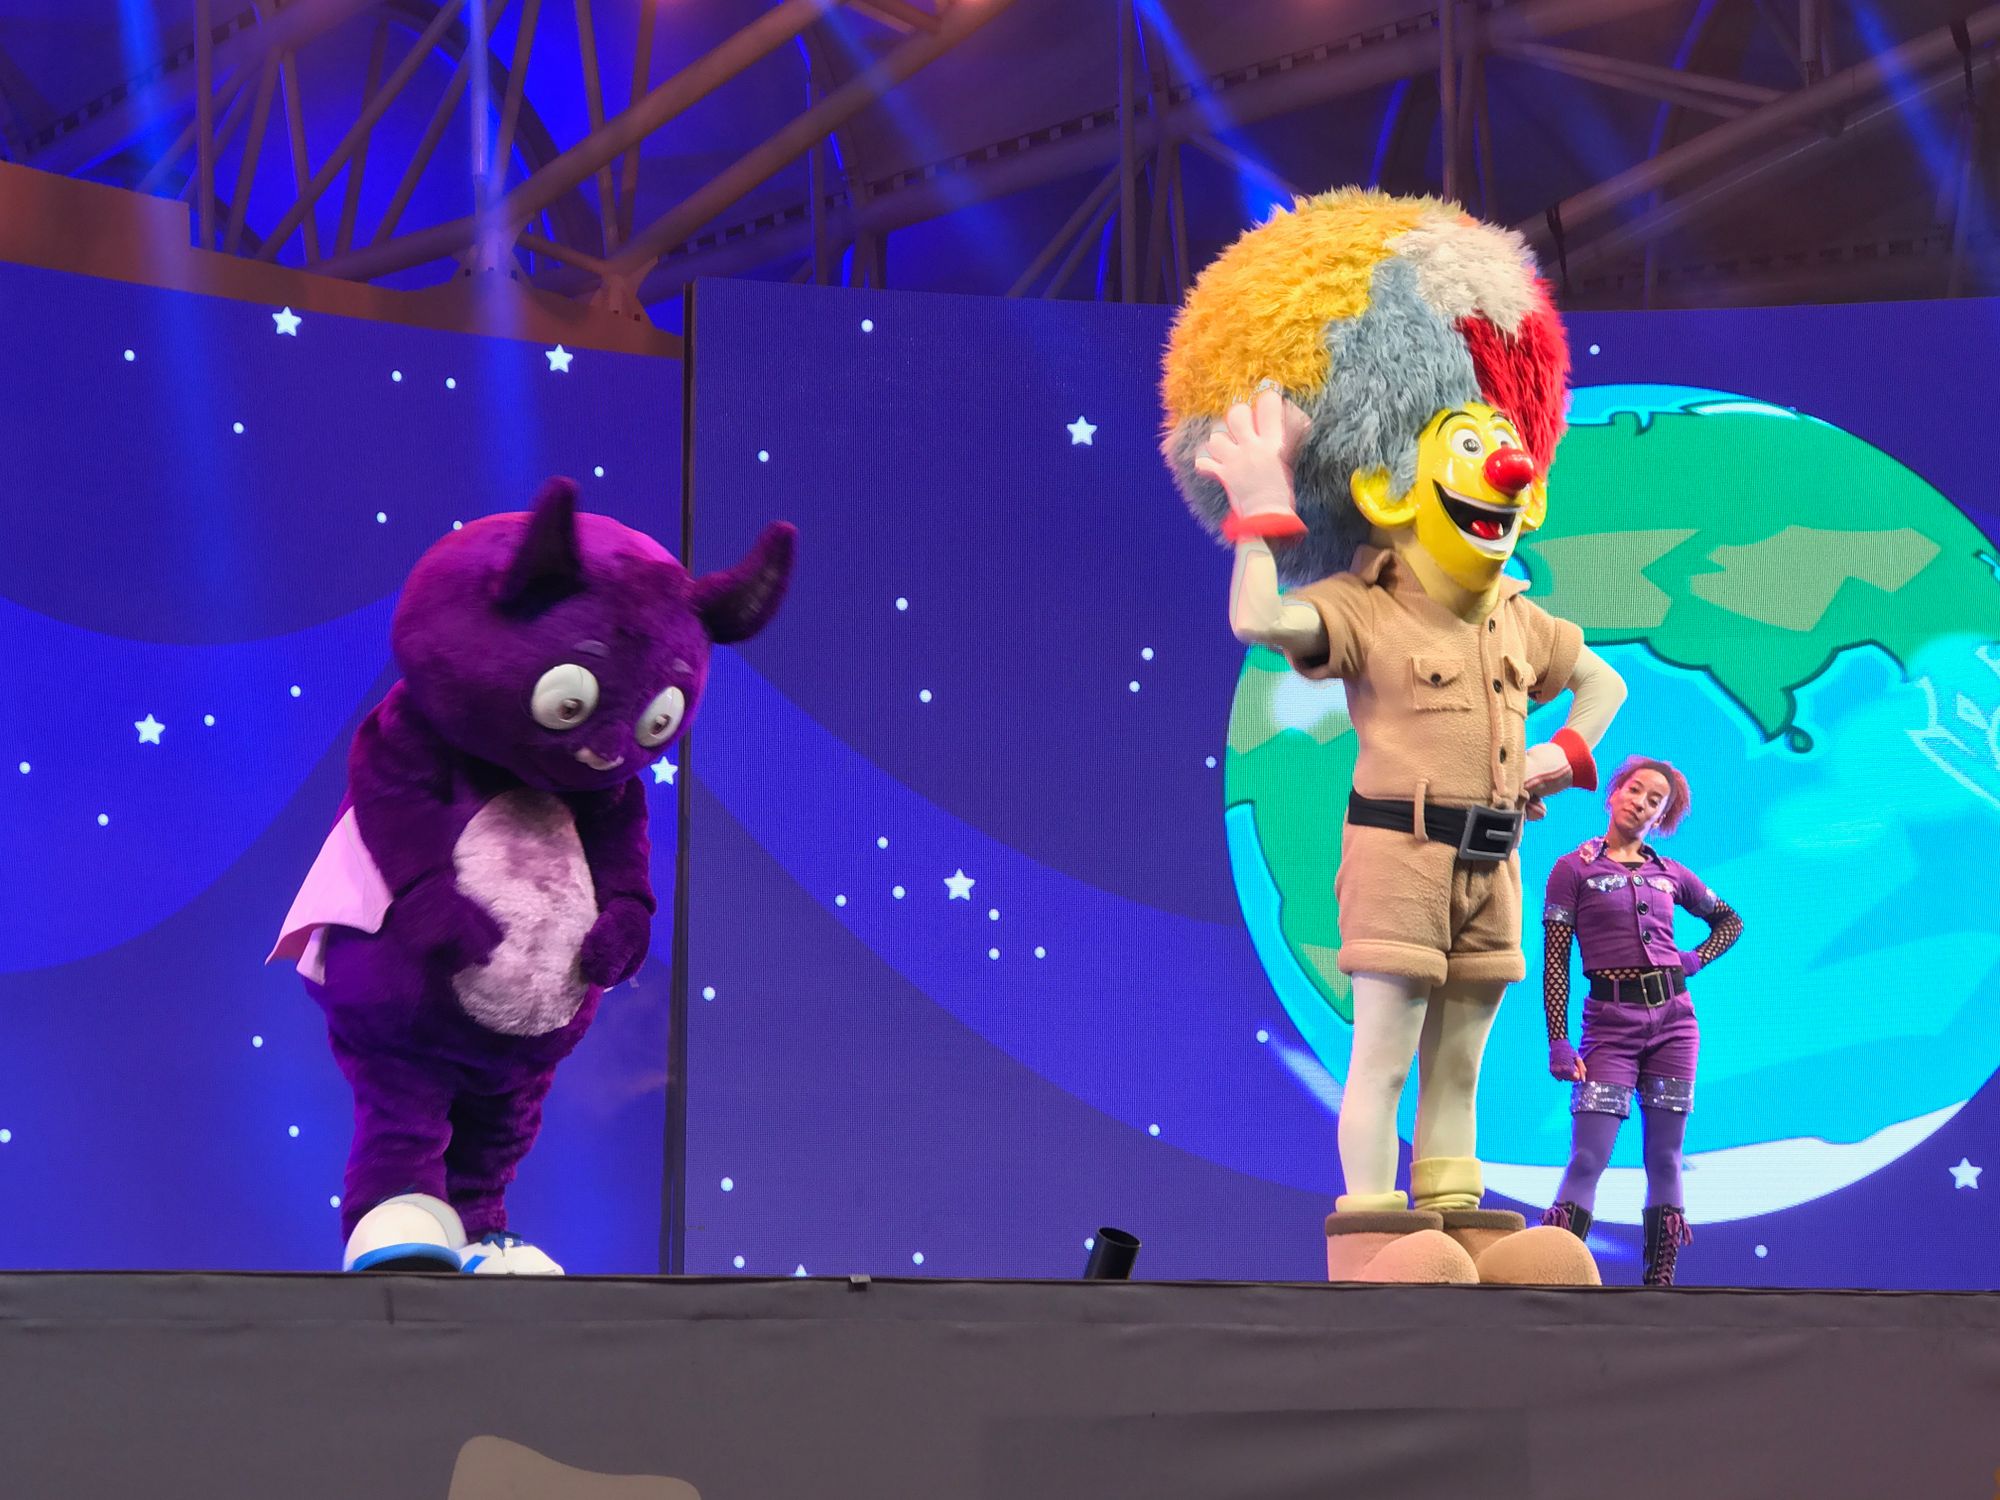 The global village mascot Globo and his friends